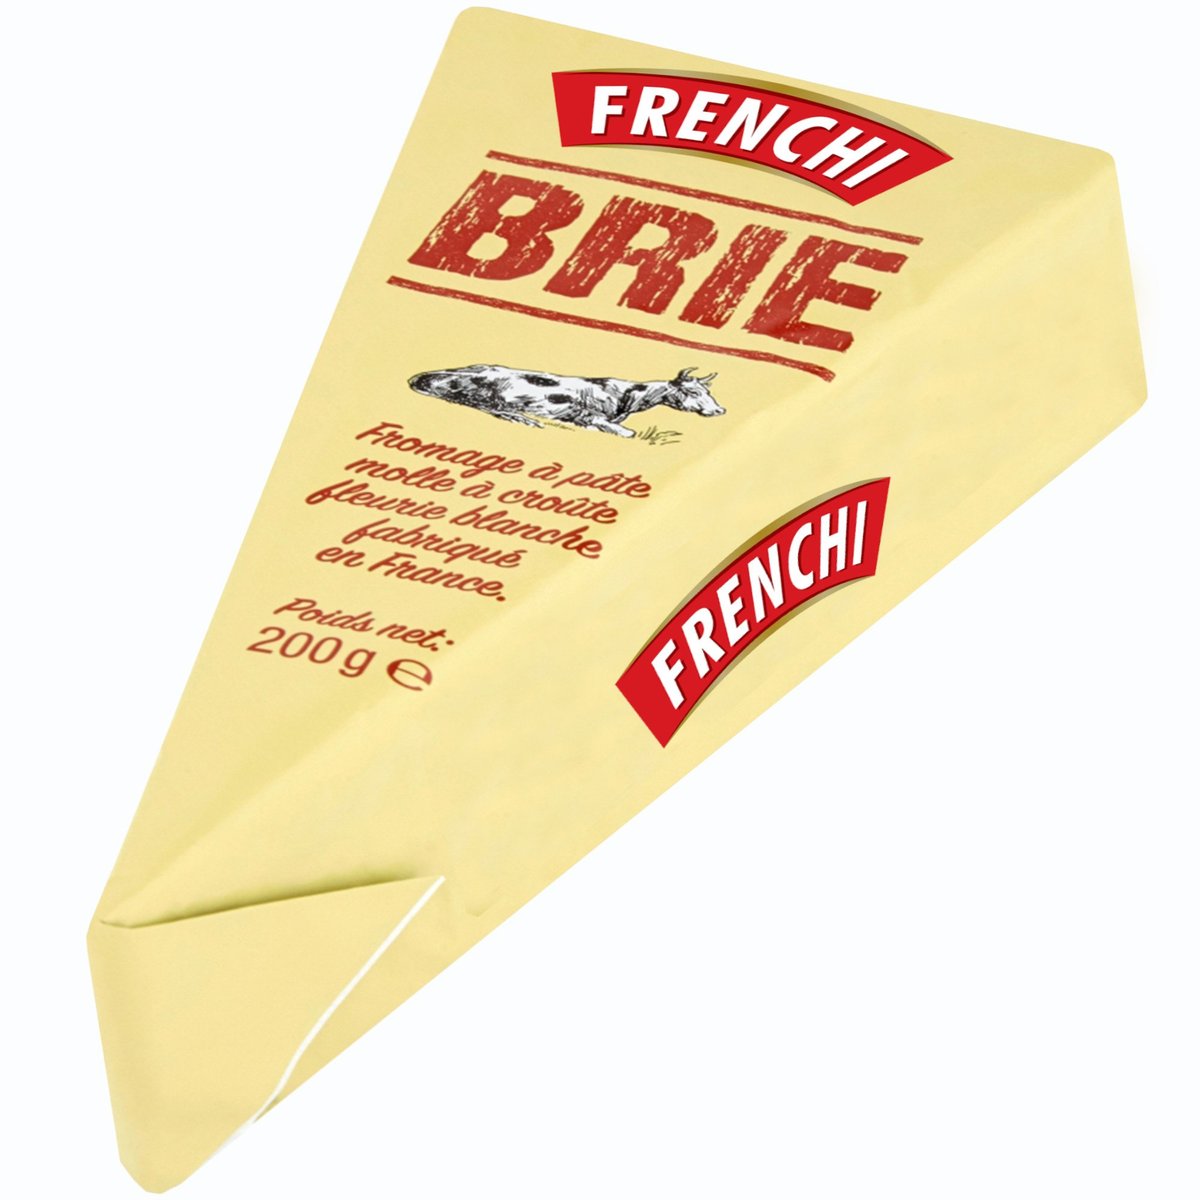 Frenchi Brie